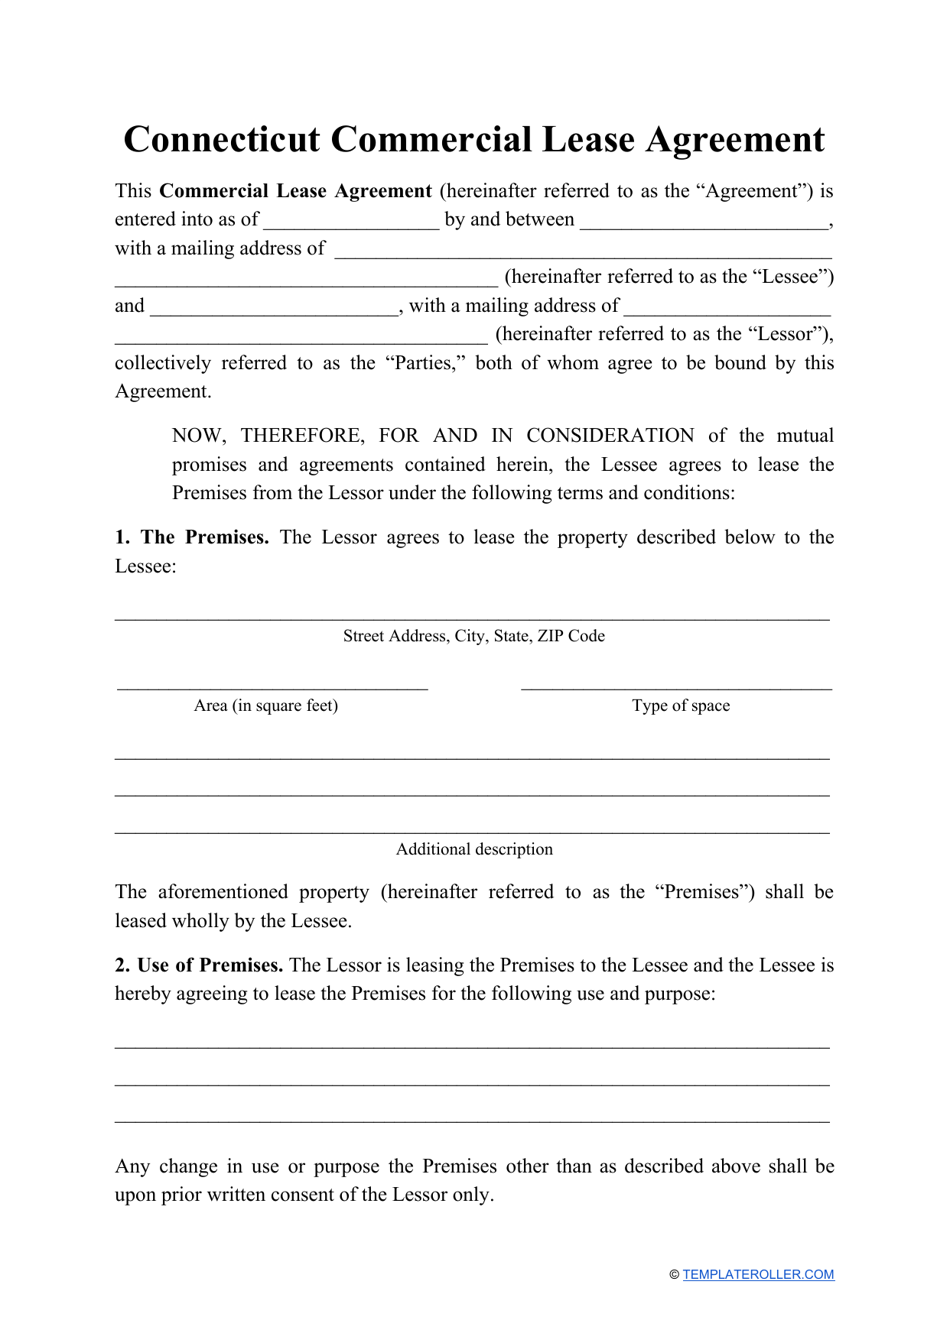 Commercial Lease Agreement Template - Connecticut, Page 1